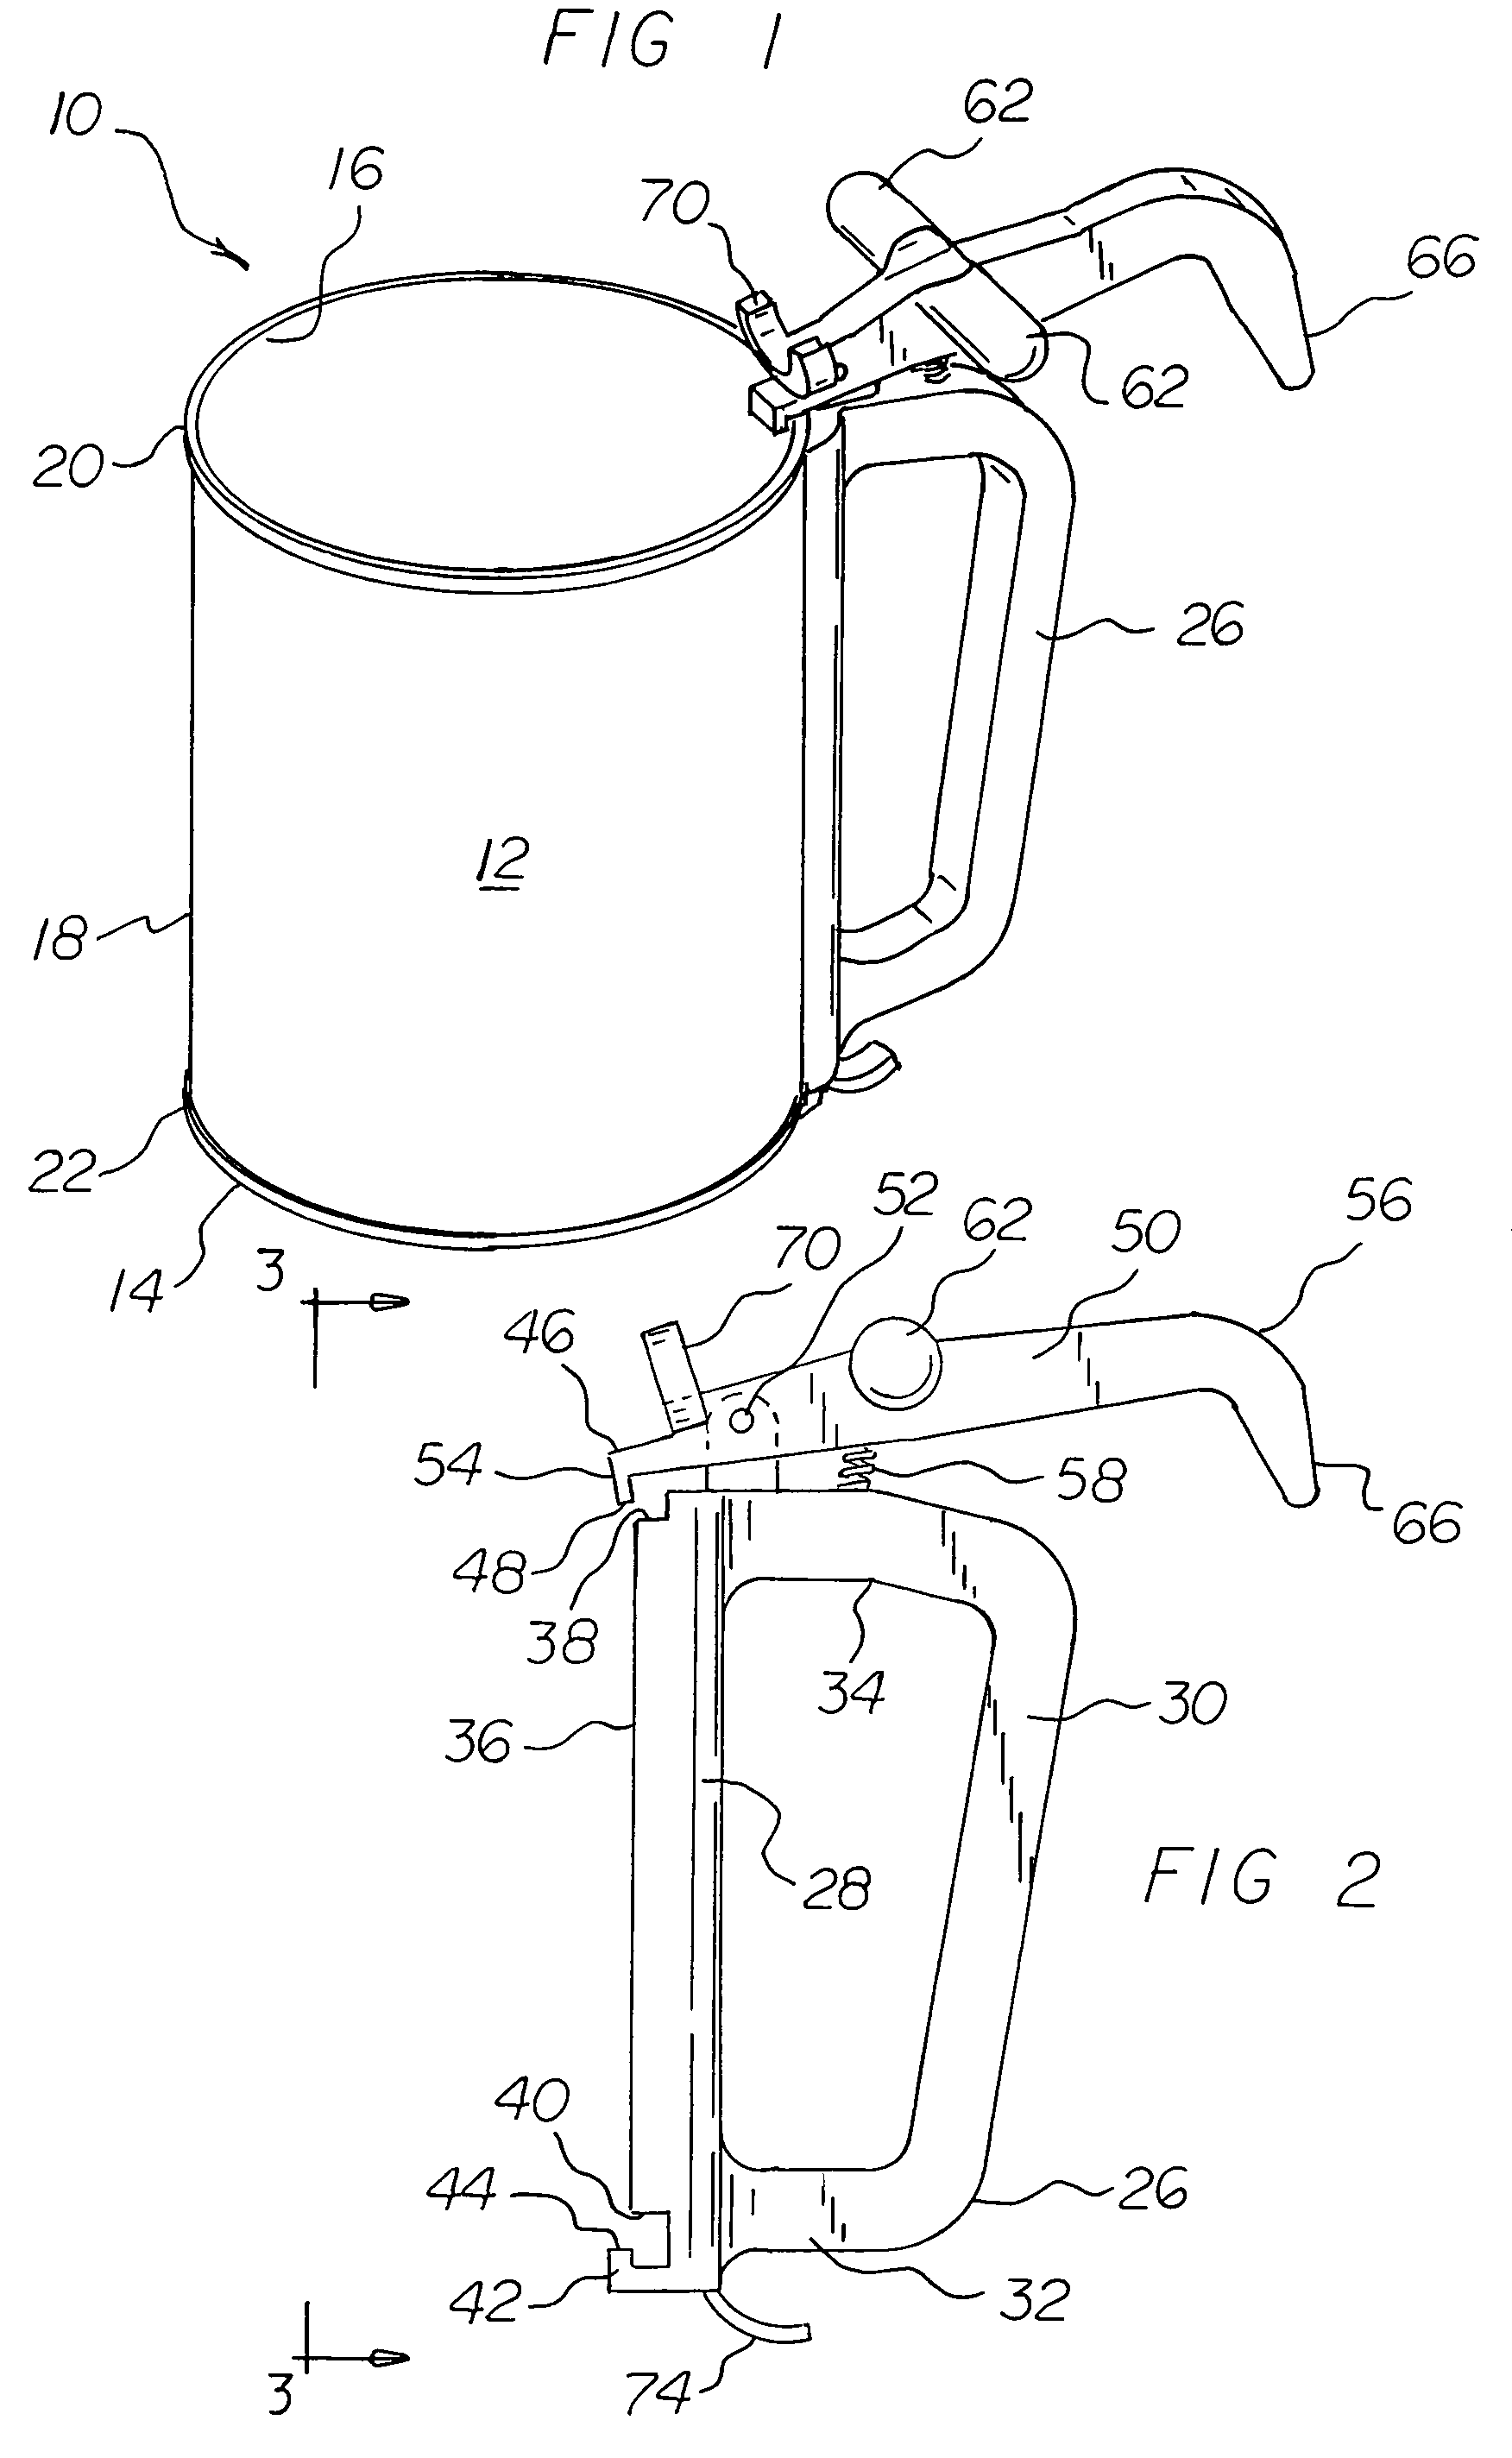 Can holder system